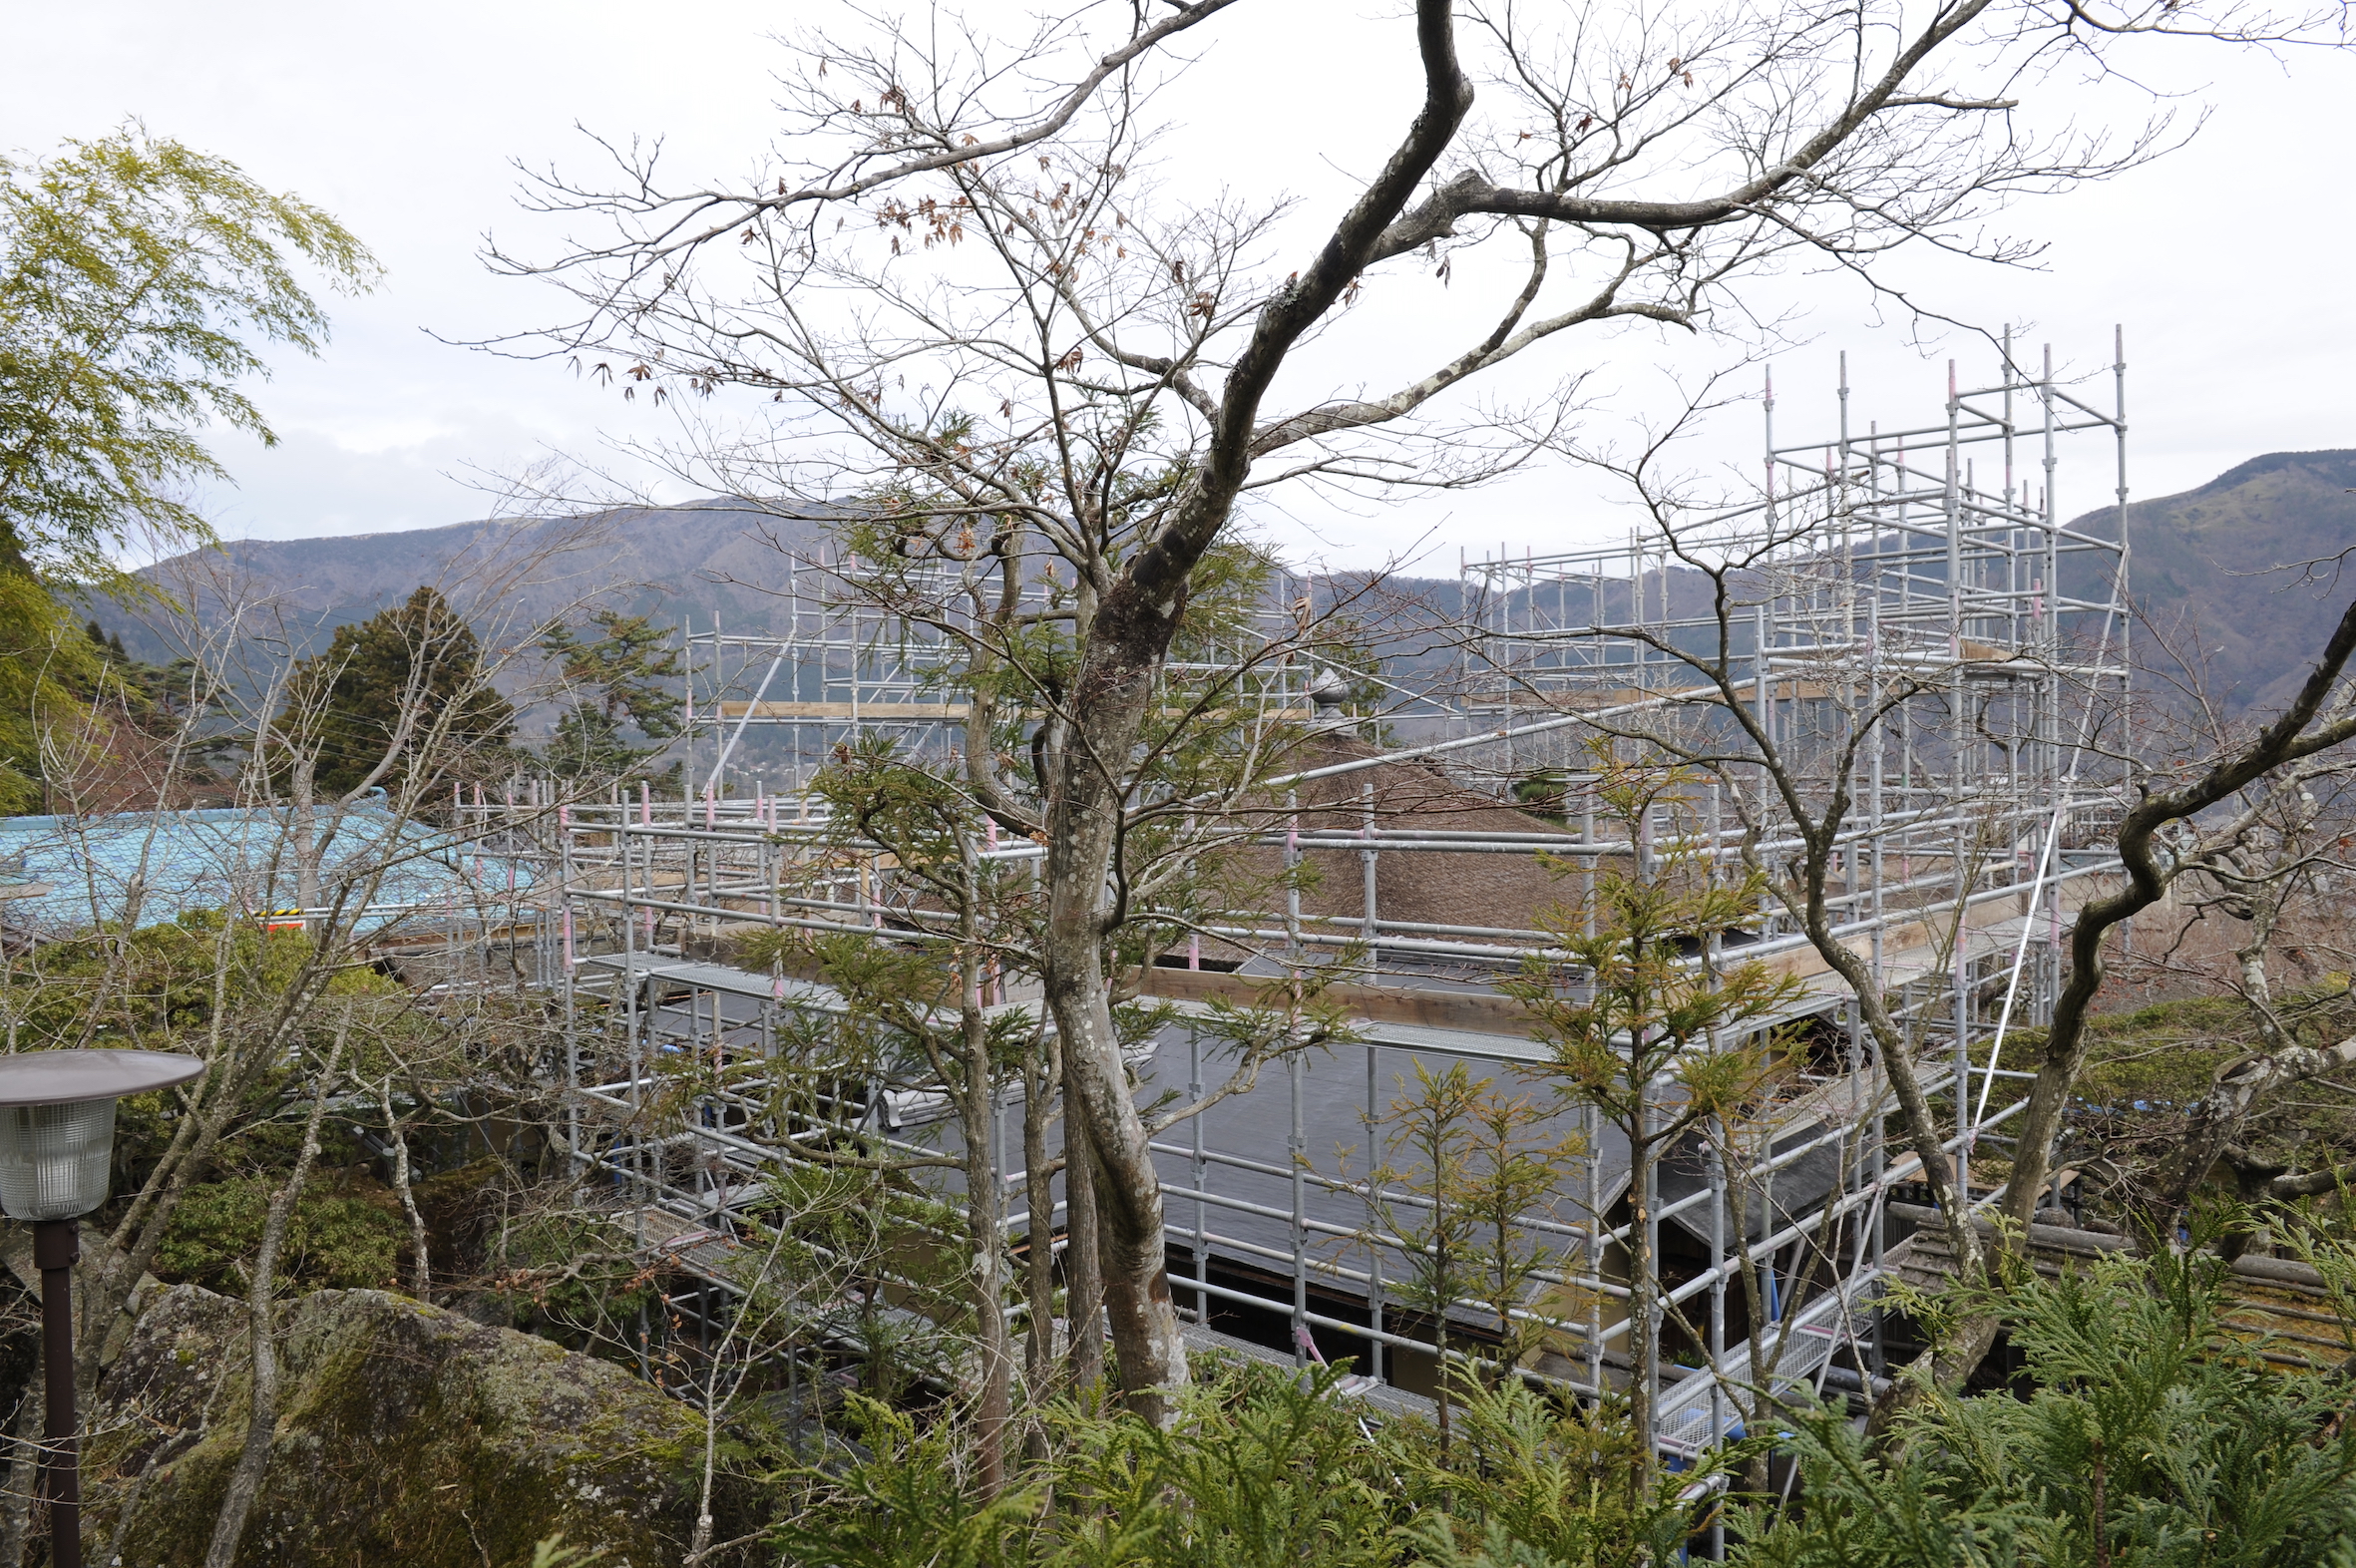 Renovation project of each facility in Shinsen-kyo